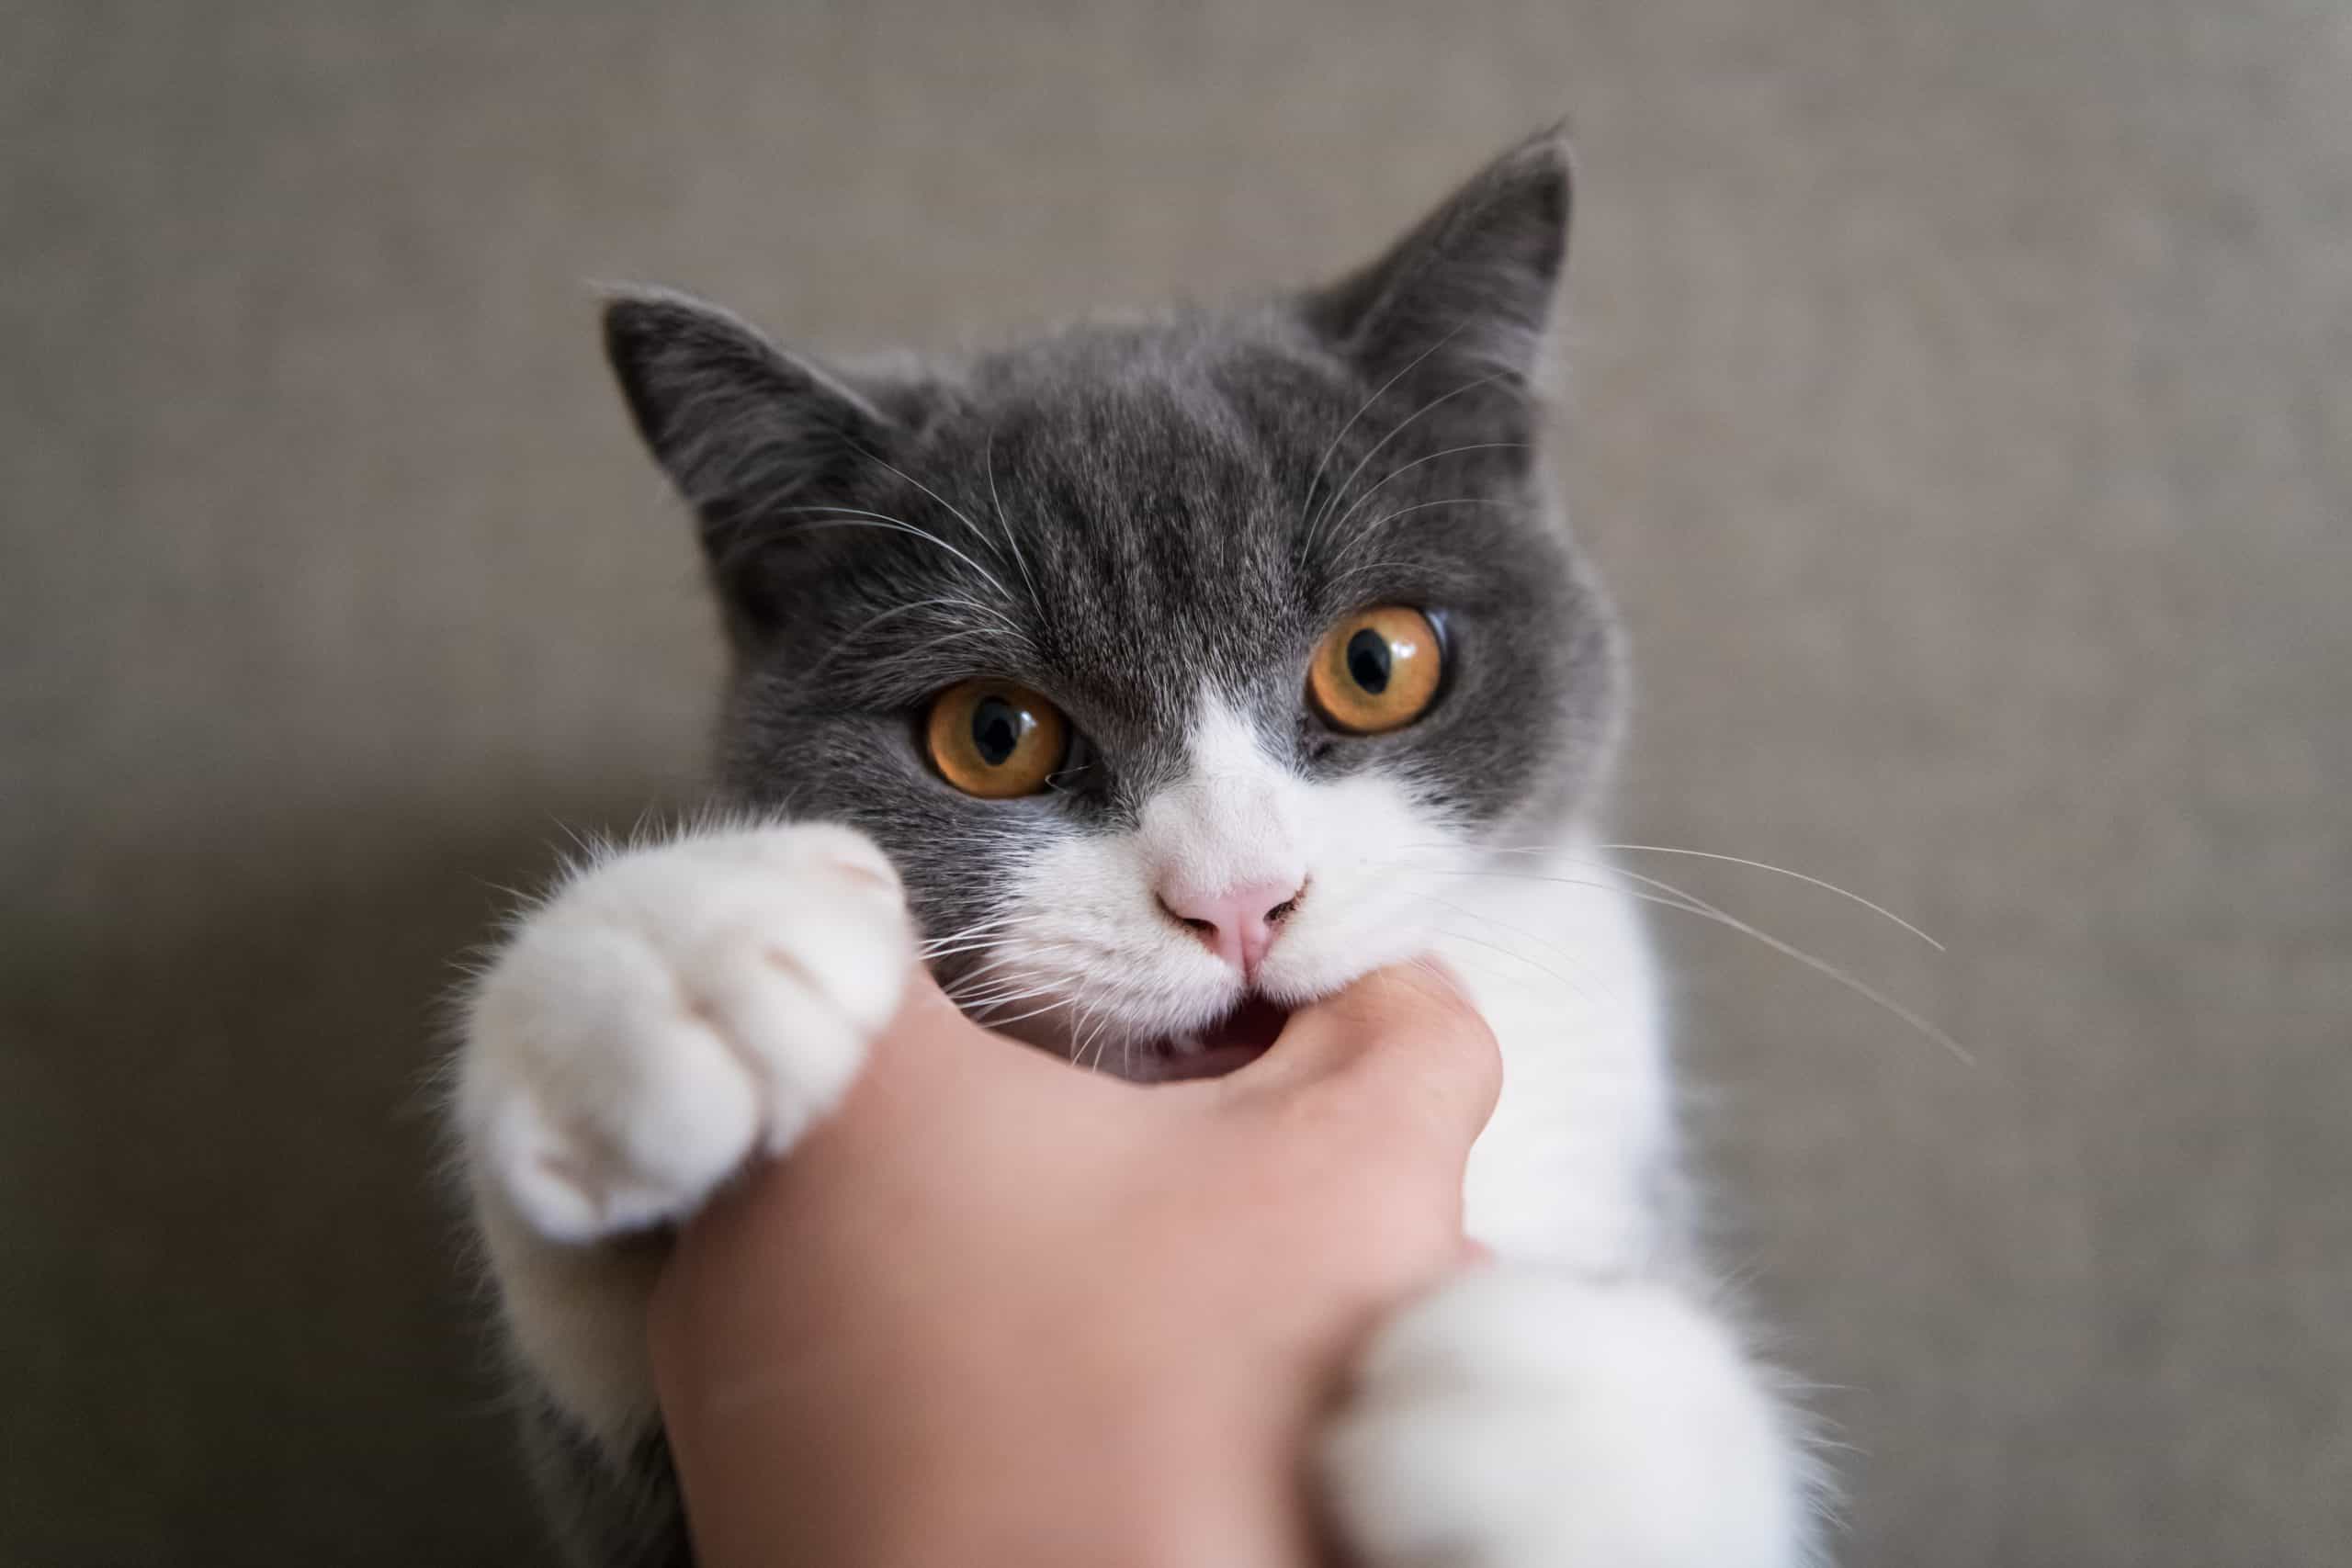 Fingers playing with kittens